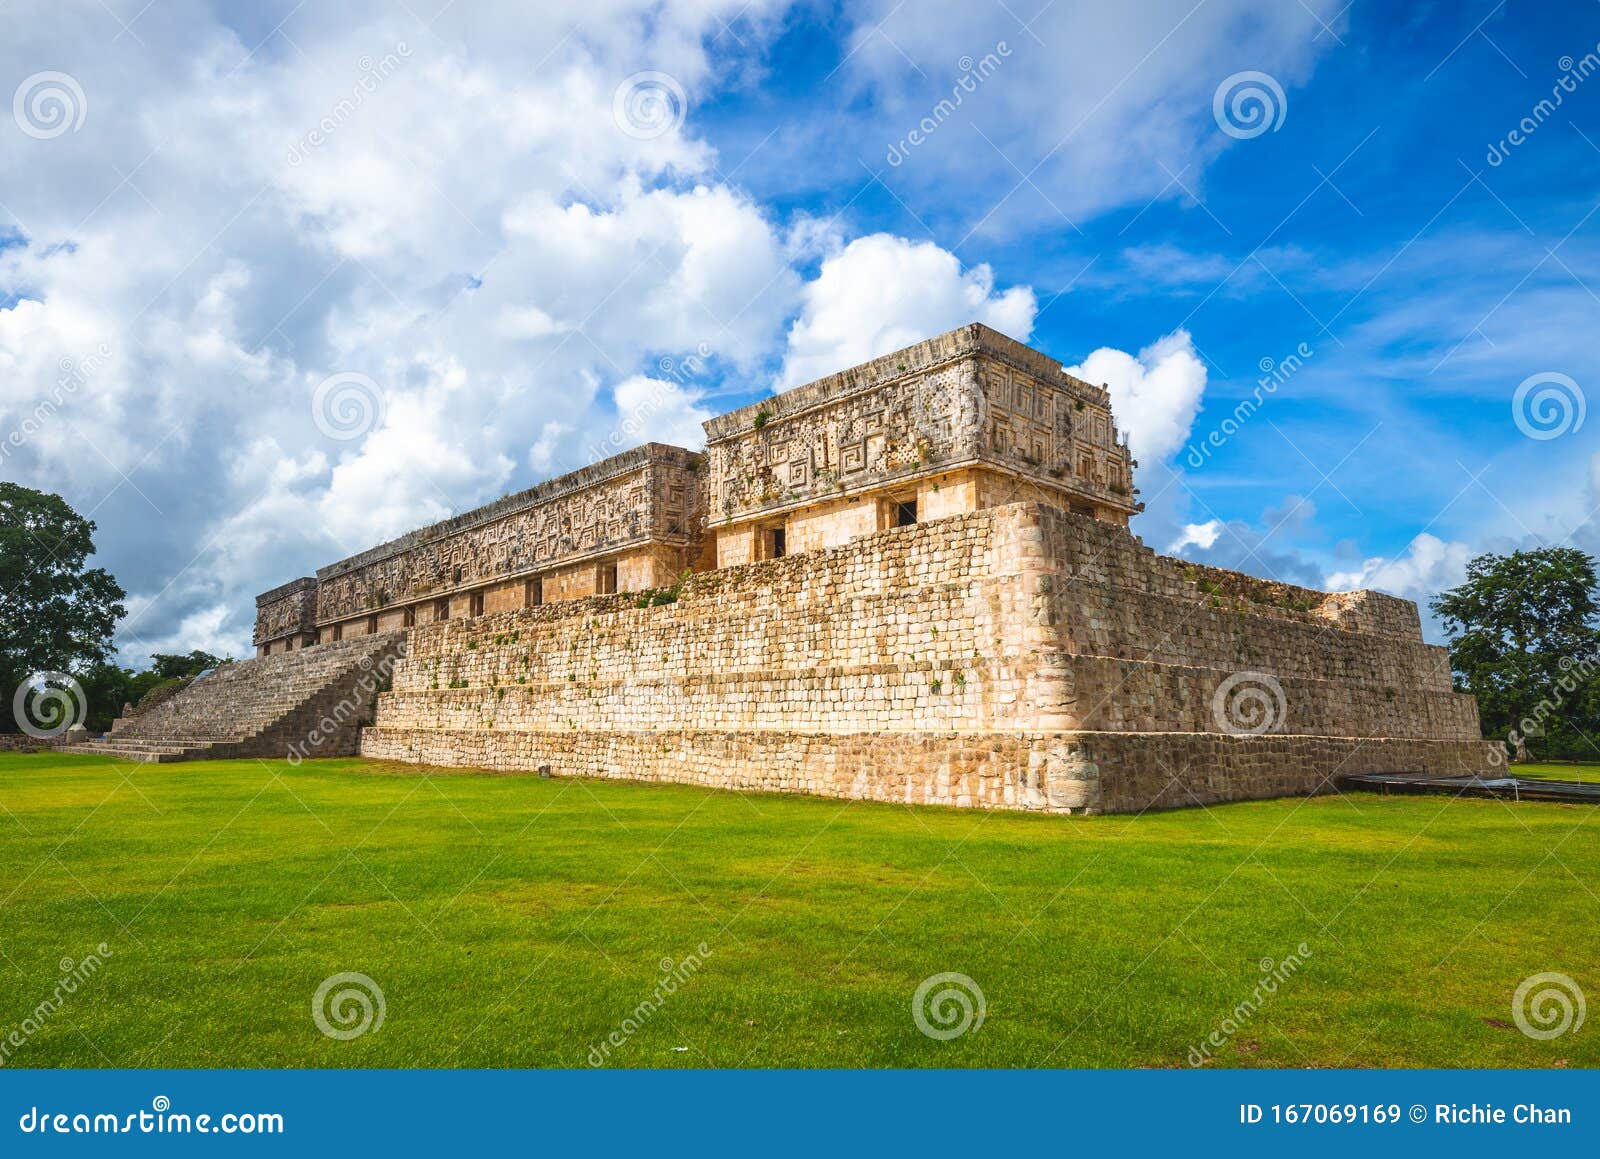 facade of the governor palace in uxmal, mexico